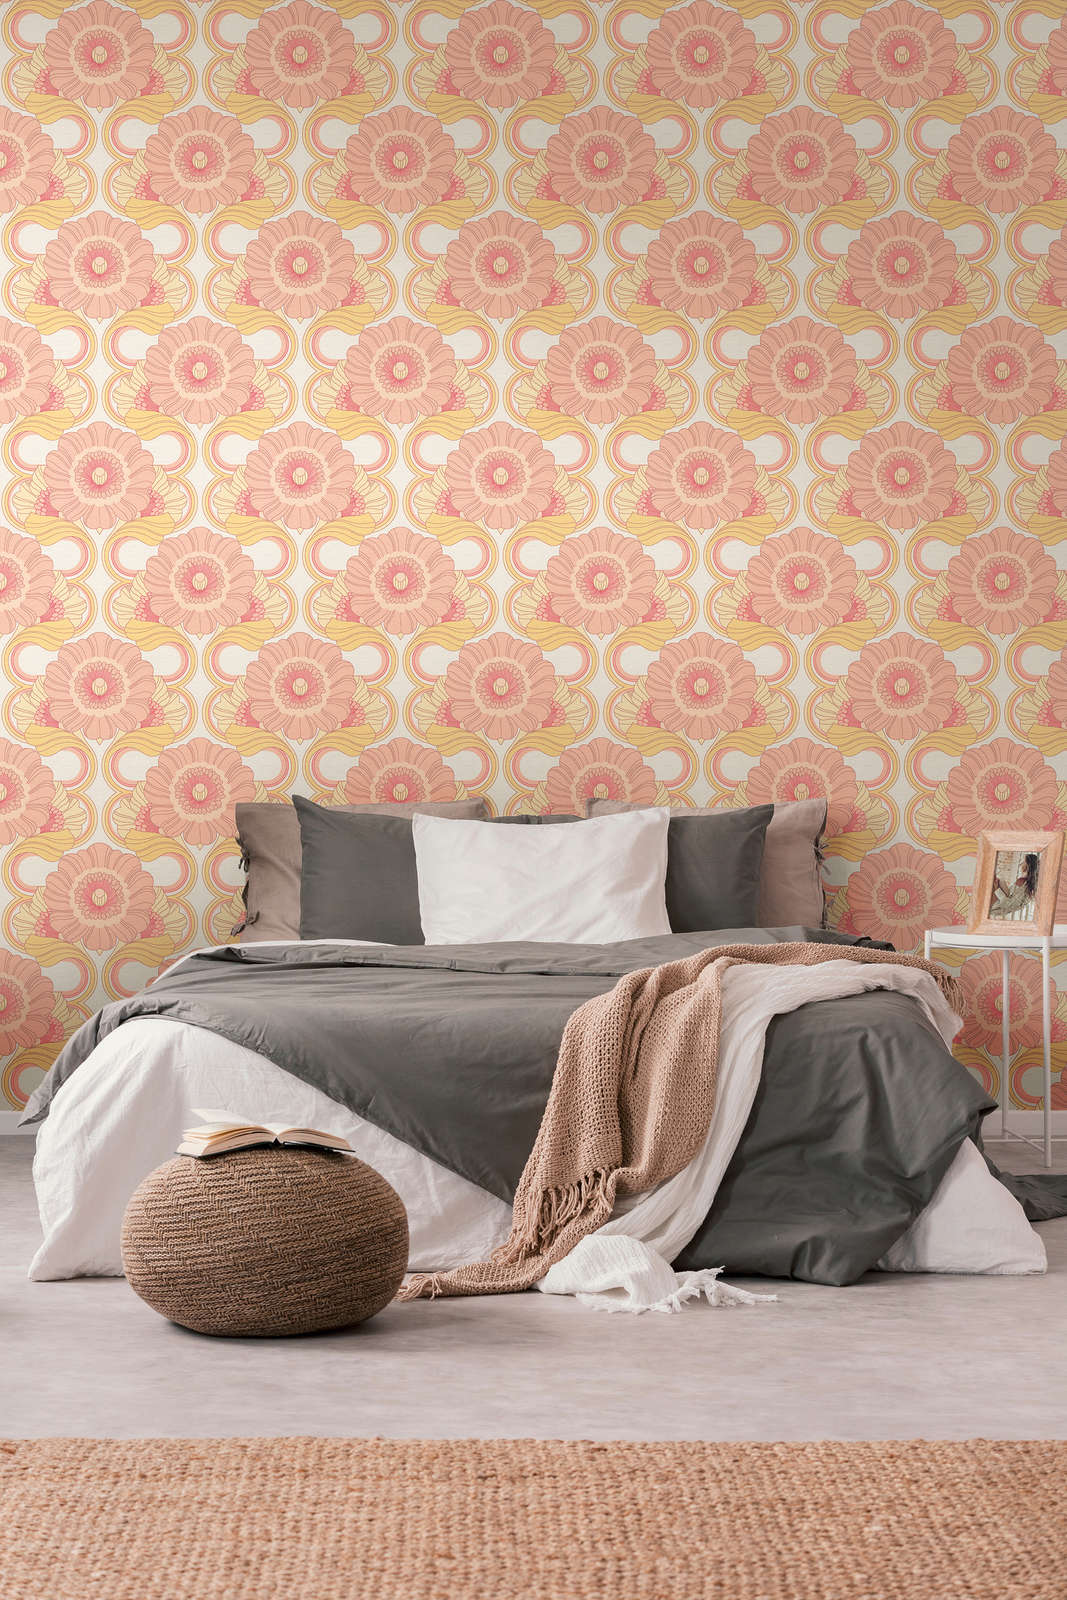             Floral retro wallpaper with light structure - yellow, pink, white
        